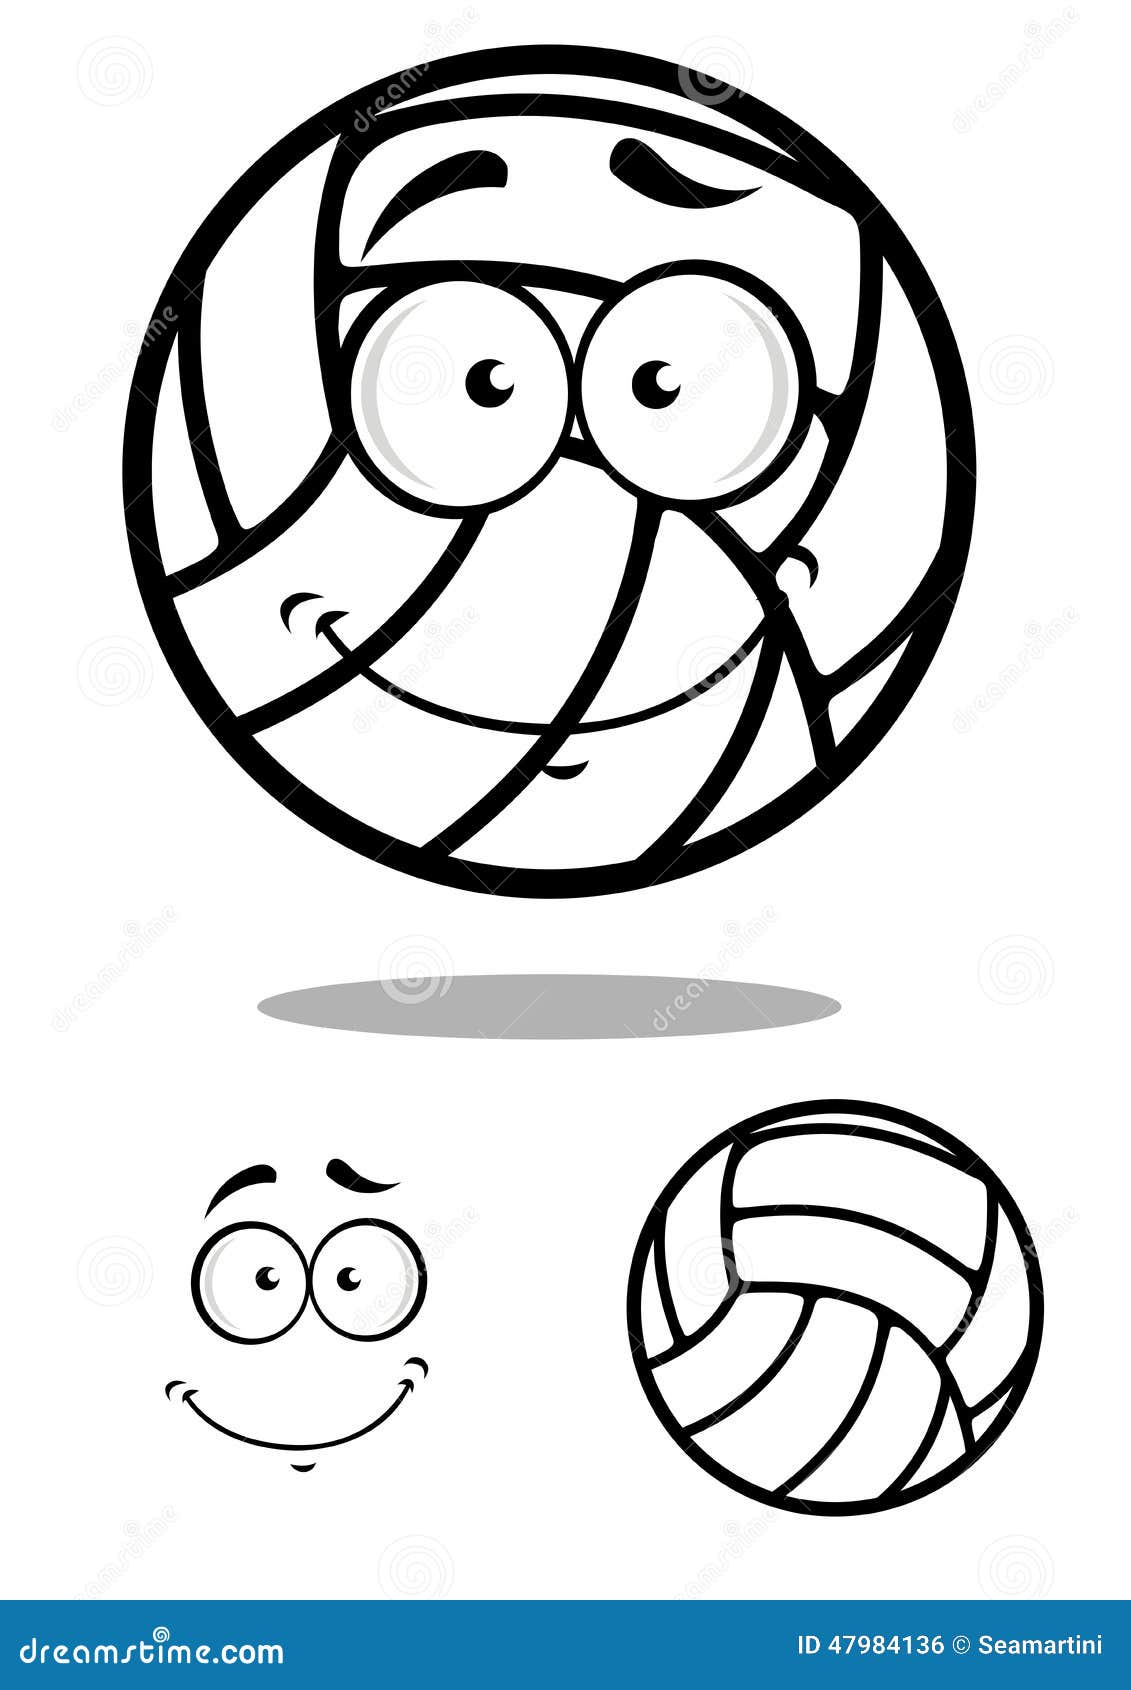 Shy Volleyball Ball Character Design Elements Stock Vector ...